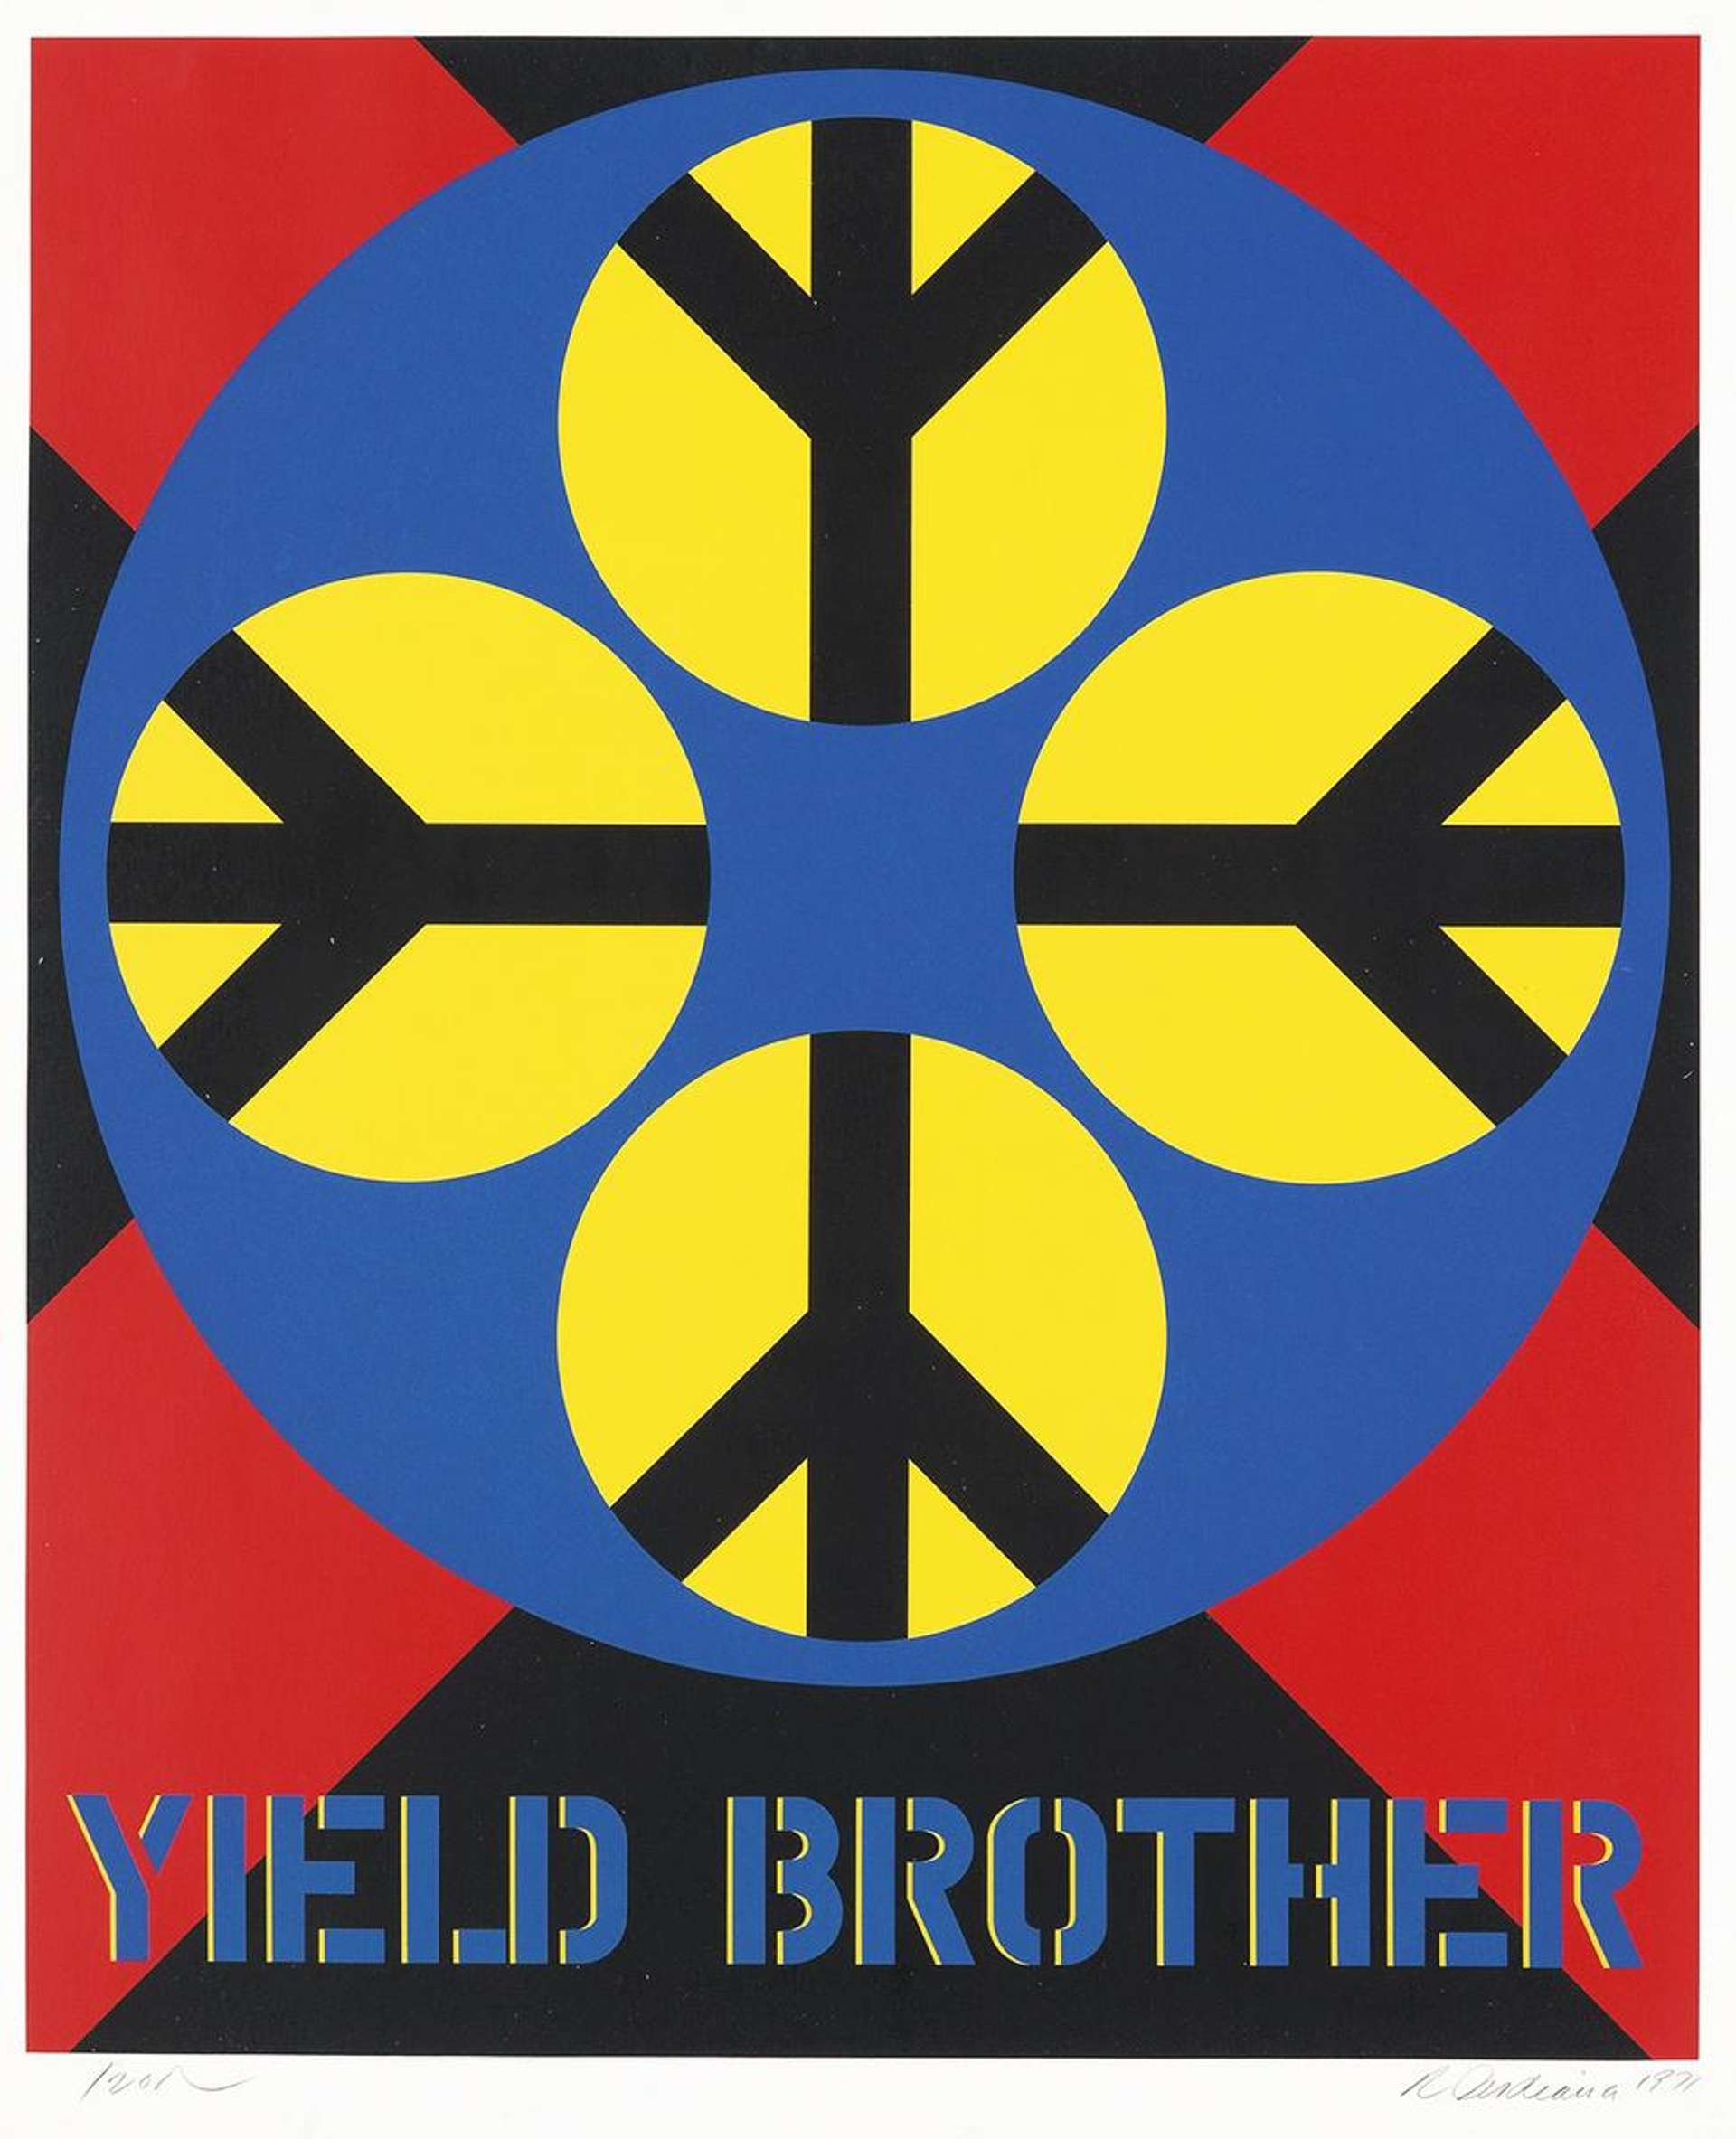 Decade (Yield Brother) - Signed Print by Robert Indiana 1971 - MyArtBroker